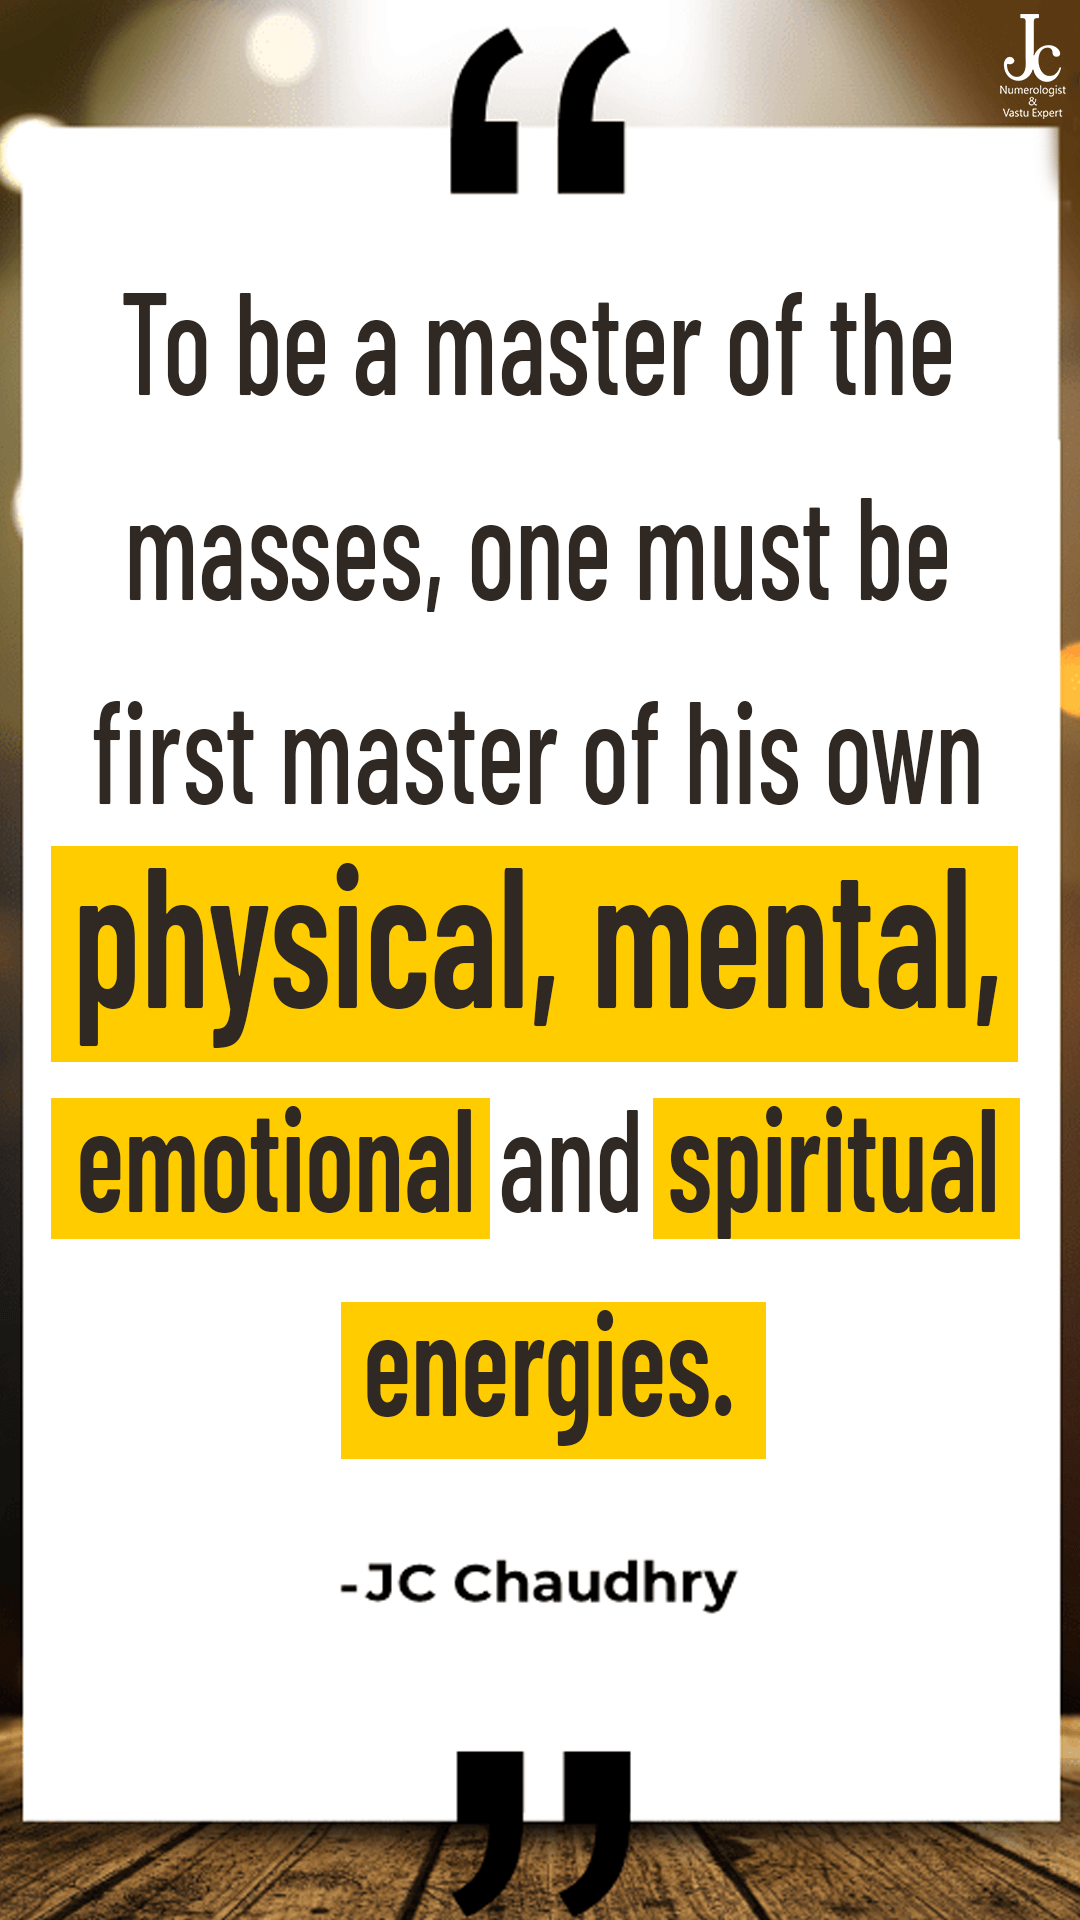 “To be a master of the masses, one must be first master of his own physical, mental, emotional and spiritual energies.